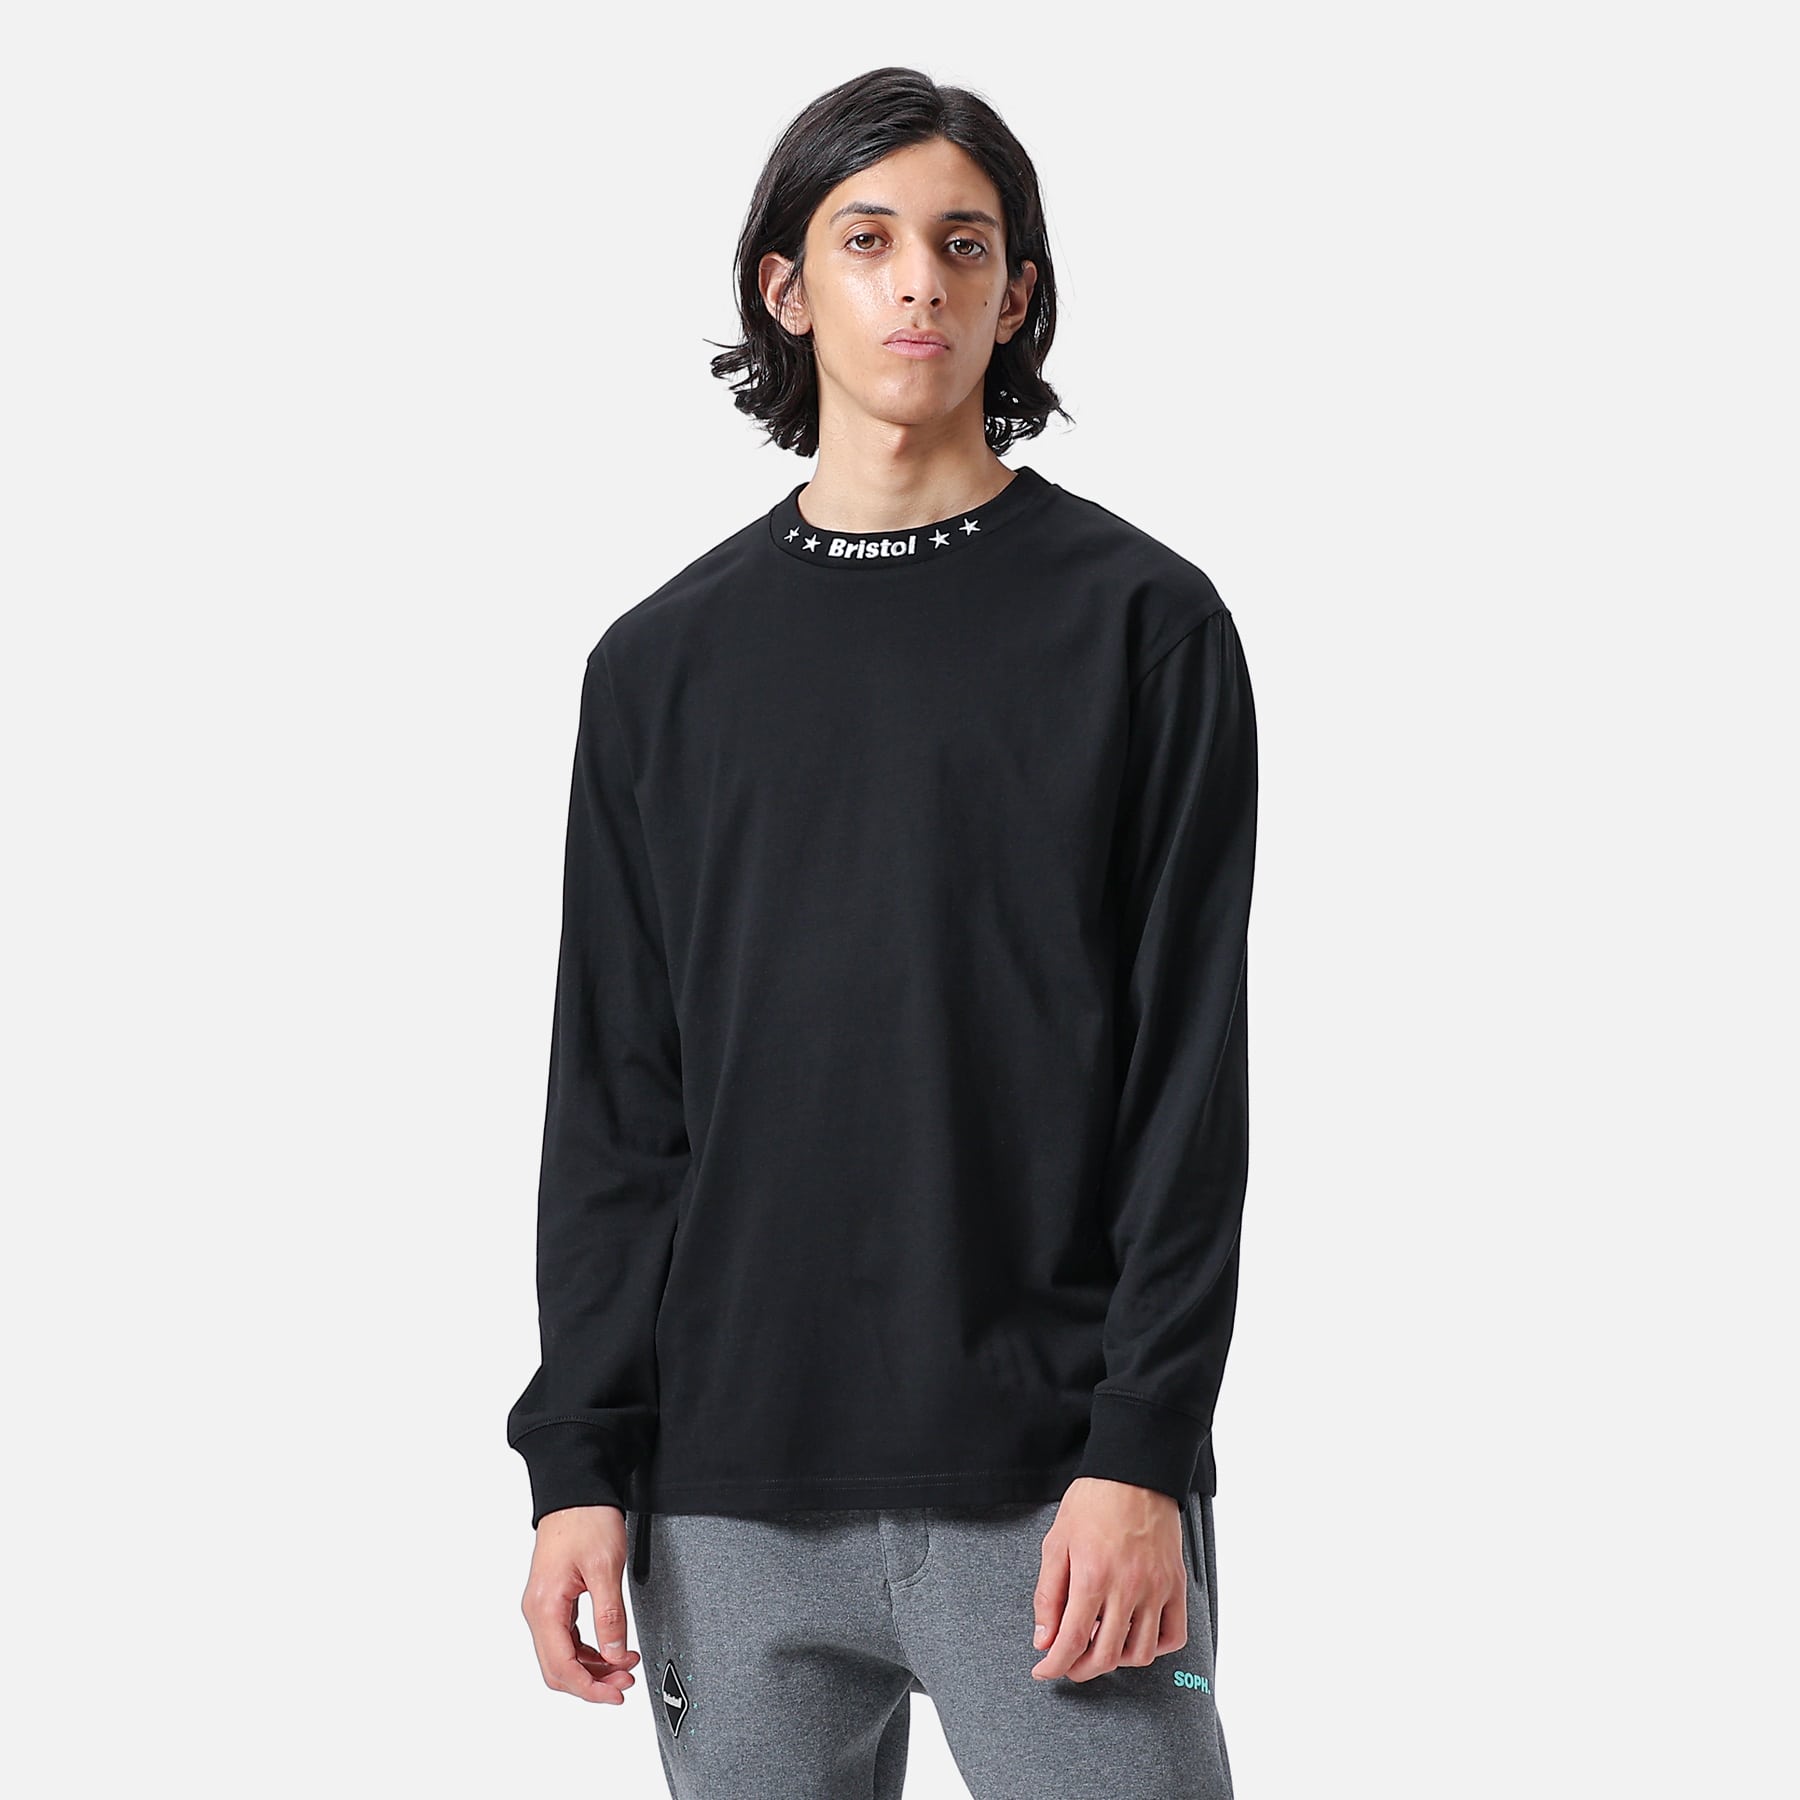 SOPH. | L/S RIBBED EMBROIDERED TEE(L BLACK):